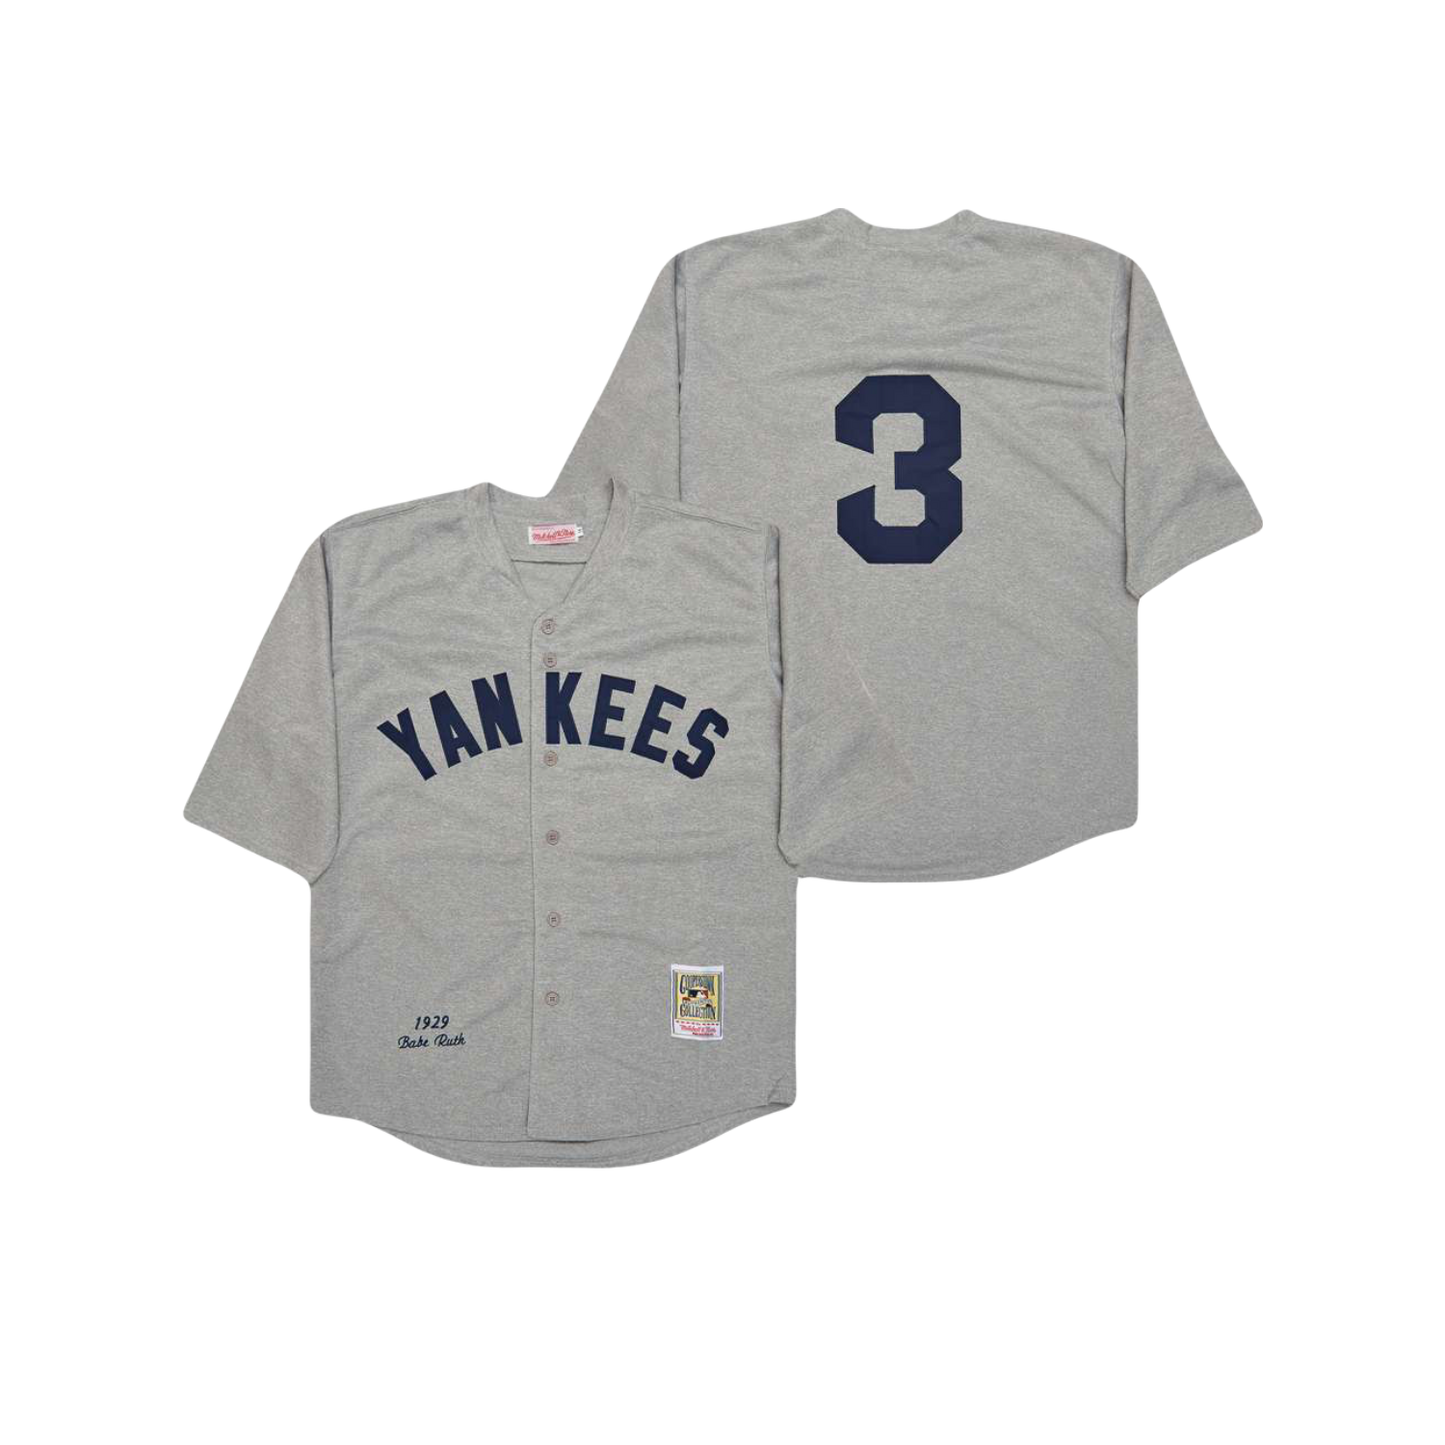 Babe Ruth New York Yankees 1929 MLB Mitchell Ness Cooperstown Classic Iconic Jersey - Gray